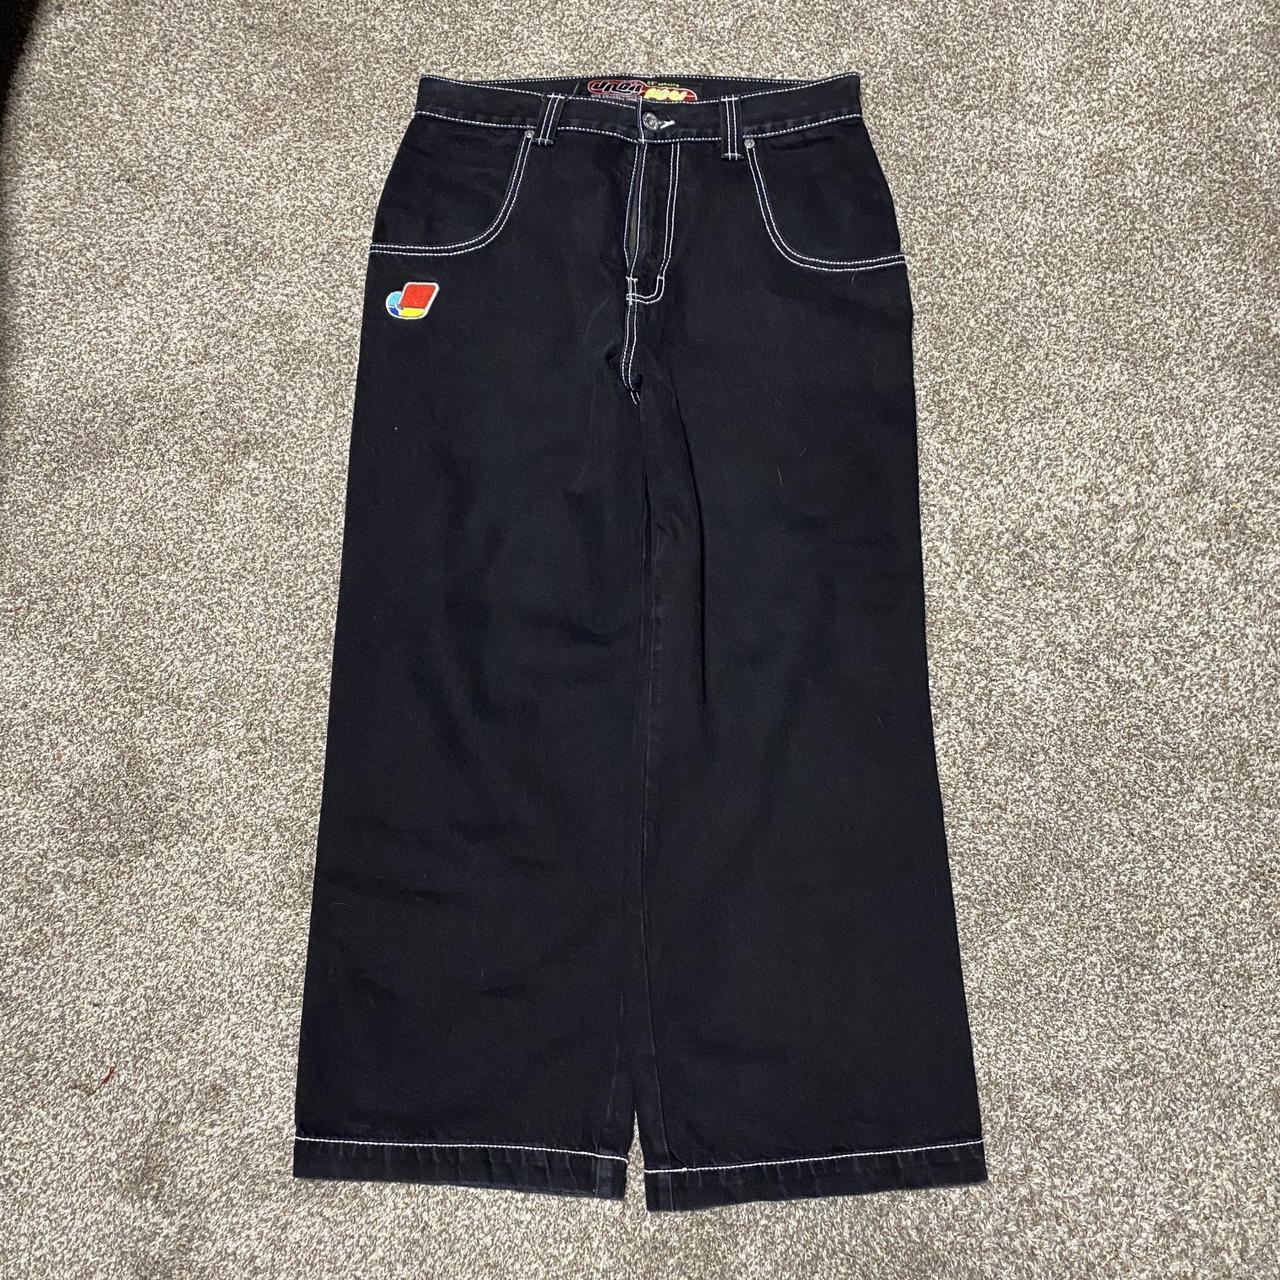 jnco pipes. tagged size 34/30. 23 inch leg opening.... - Depop